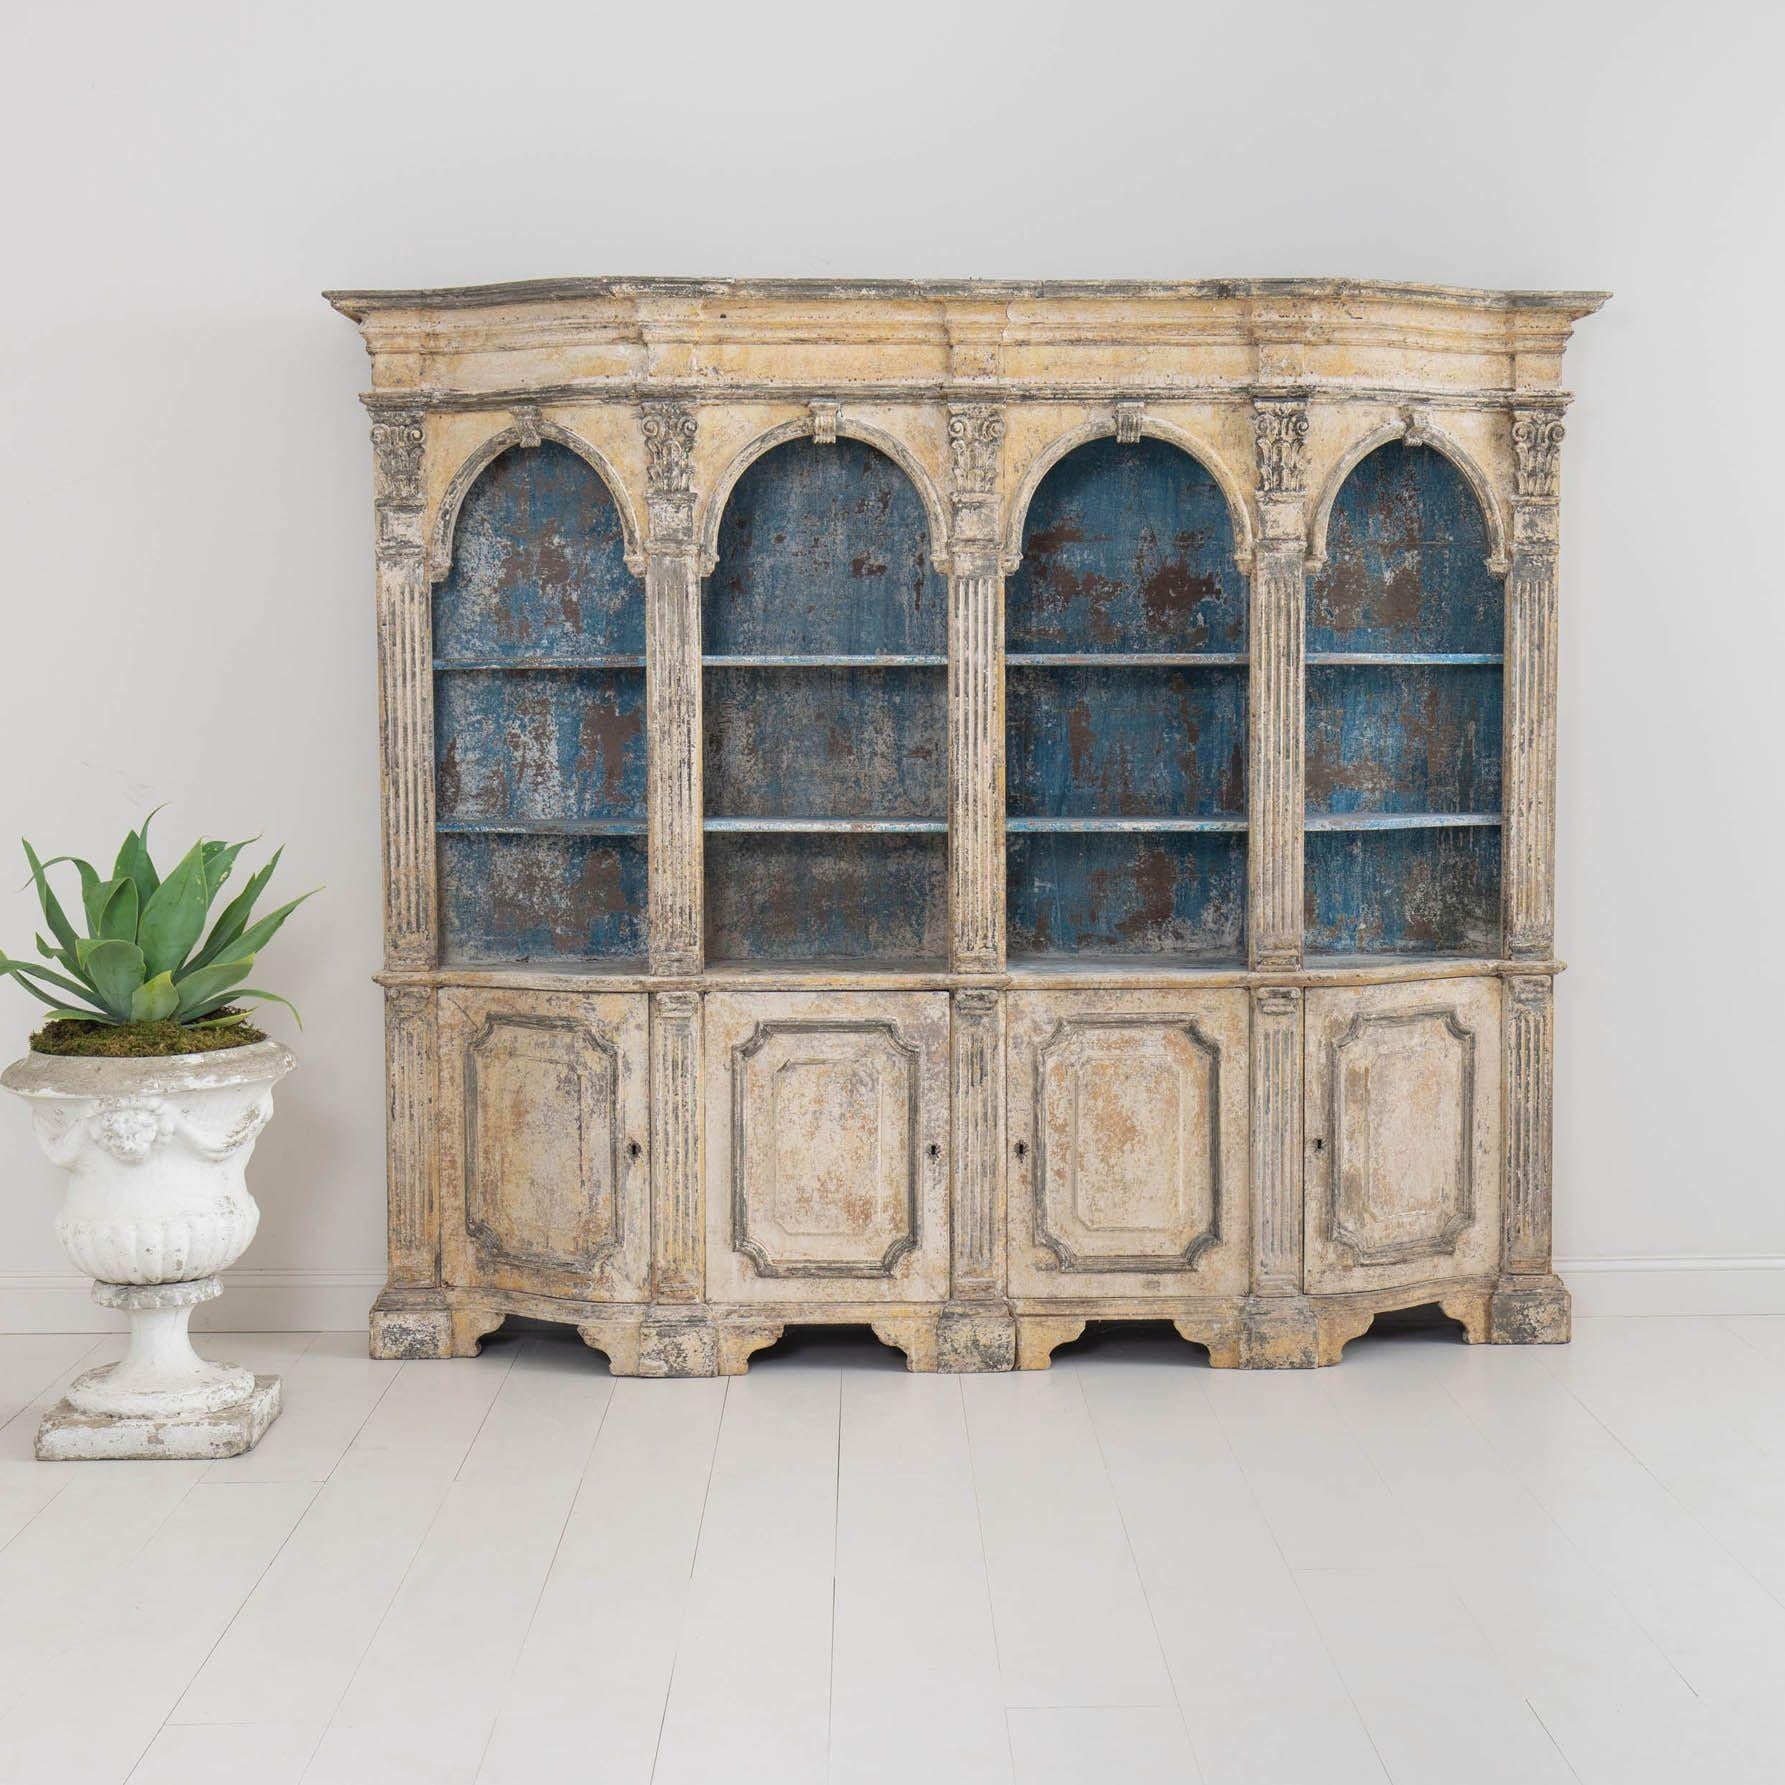 An incredible 19th century Italian Neoclassical style bookcase with a serpentine shape in original paint. Circa 1860. The carved and shaped crown sits above four arched openings with two, fixed shelves flanked by fluted pilasters adorned with